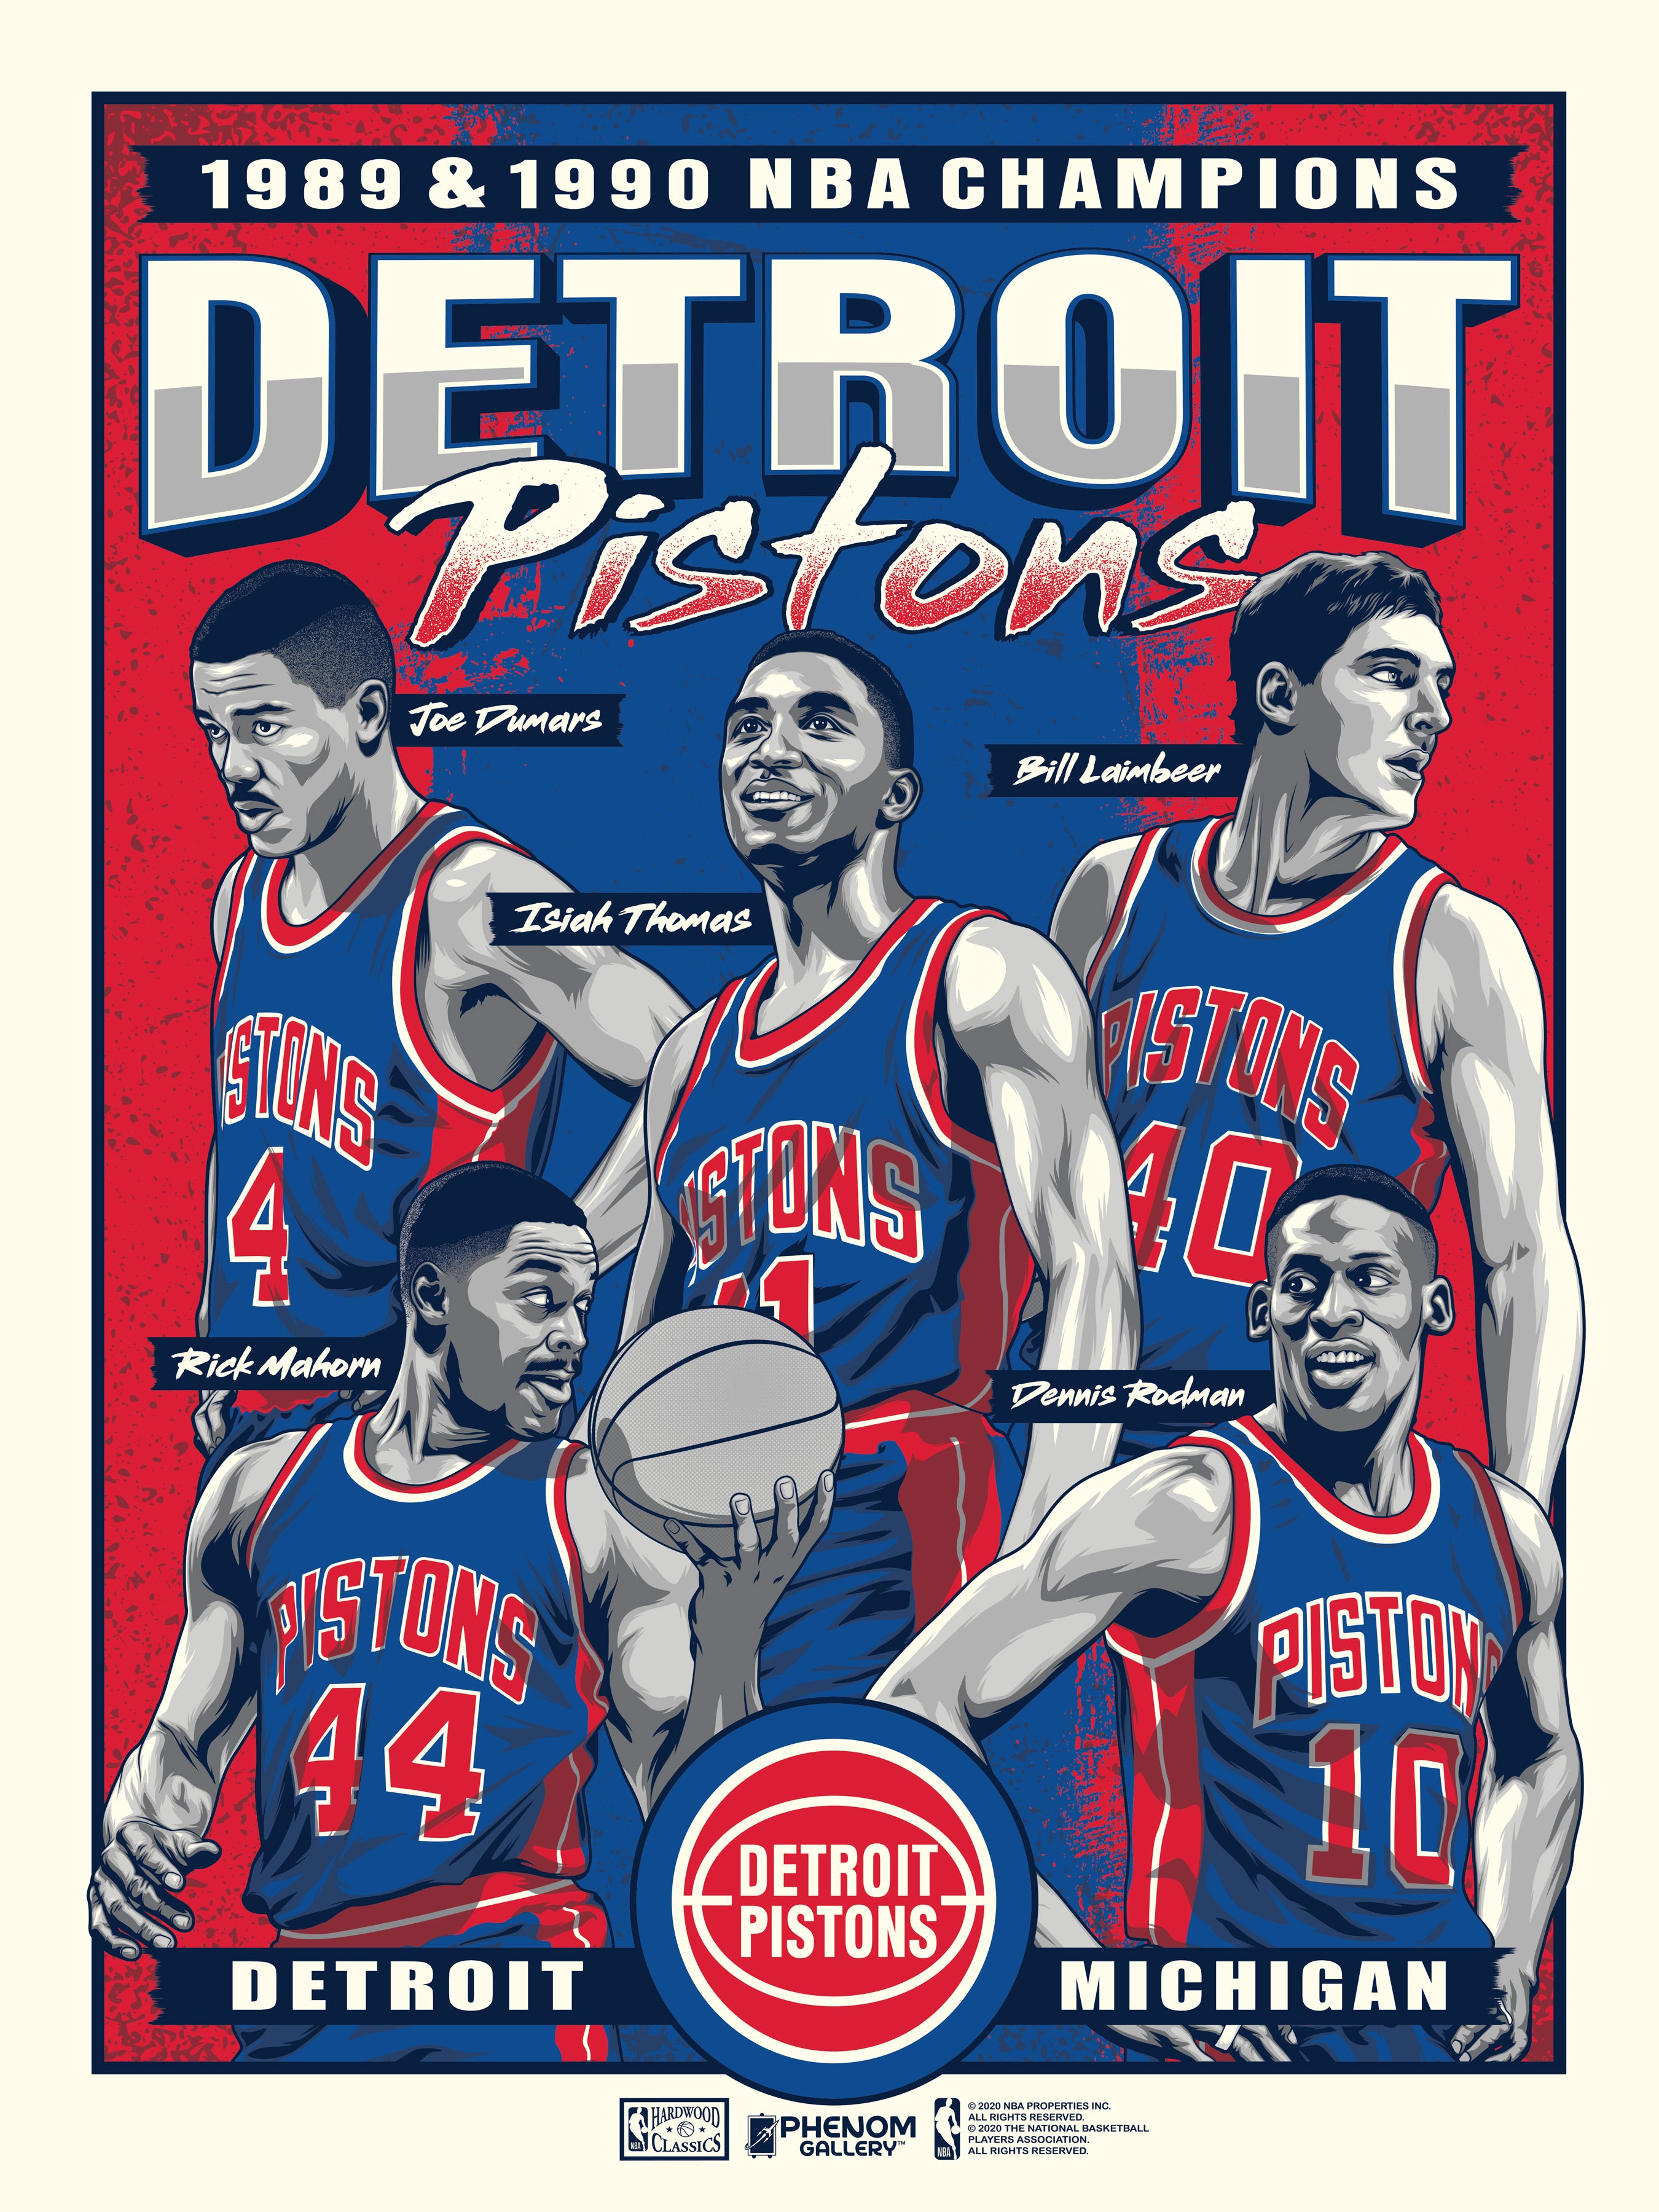 No. 18 picks in Pistons history: Can't beat Dumars